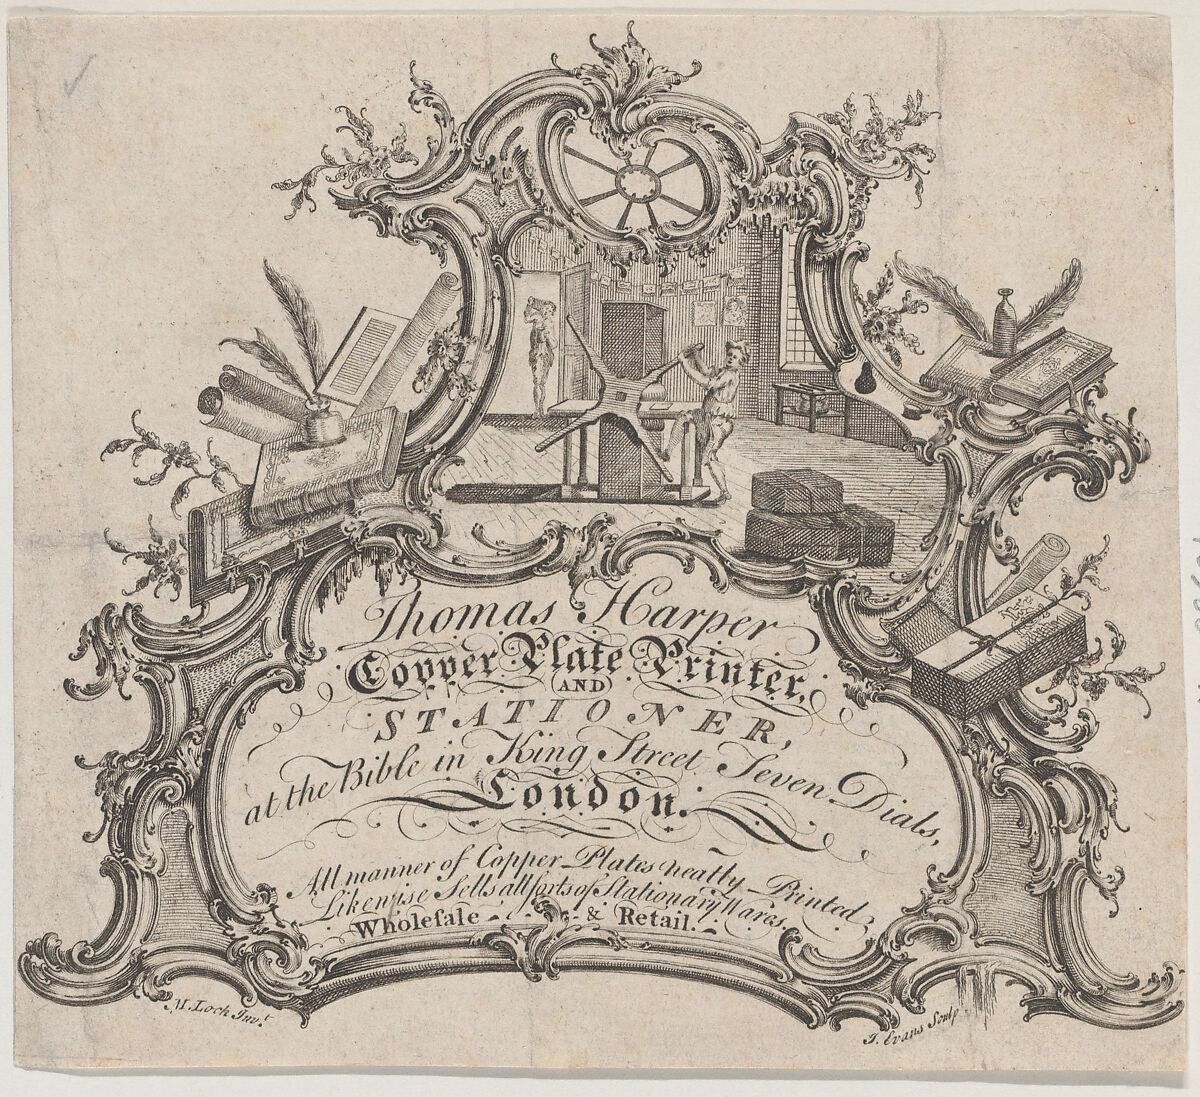 Trade Card for Thomas Harper, Copper Plate Printer and Stationer, Anonymous, British, 18th century, Engraving 